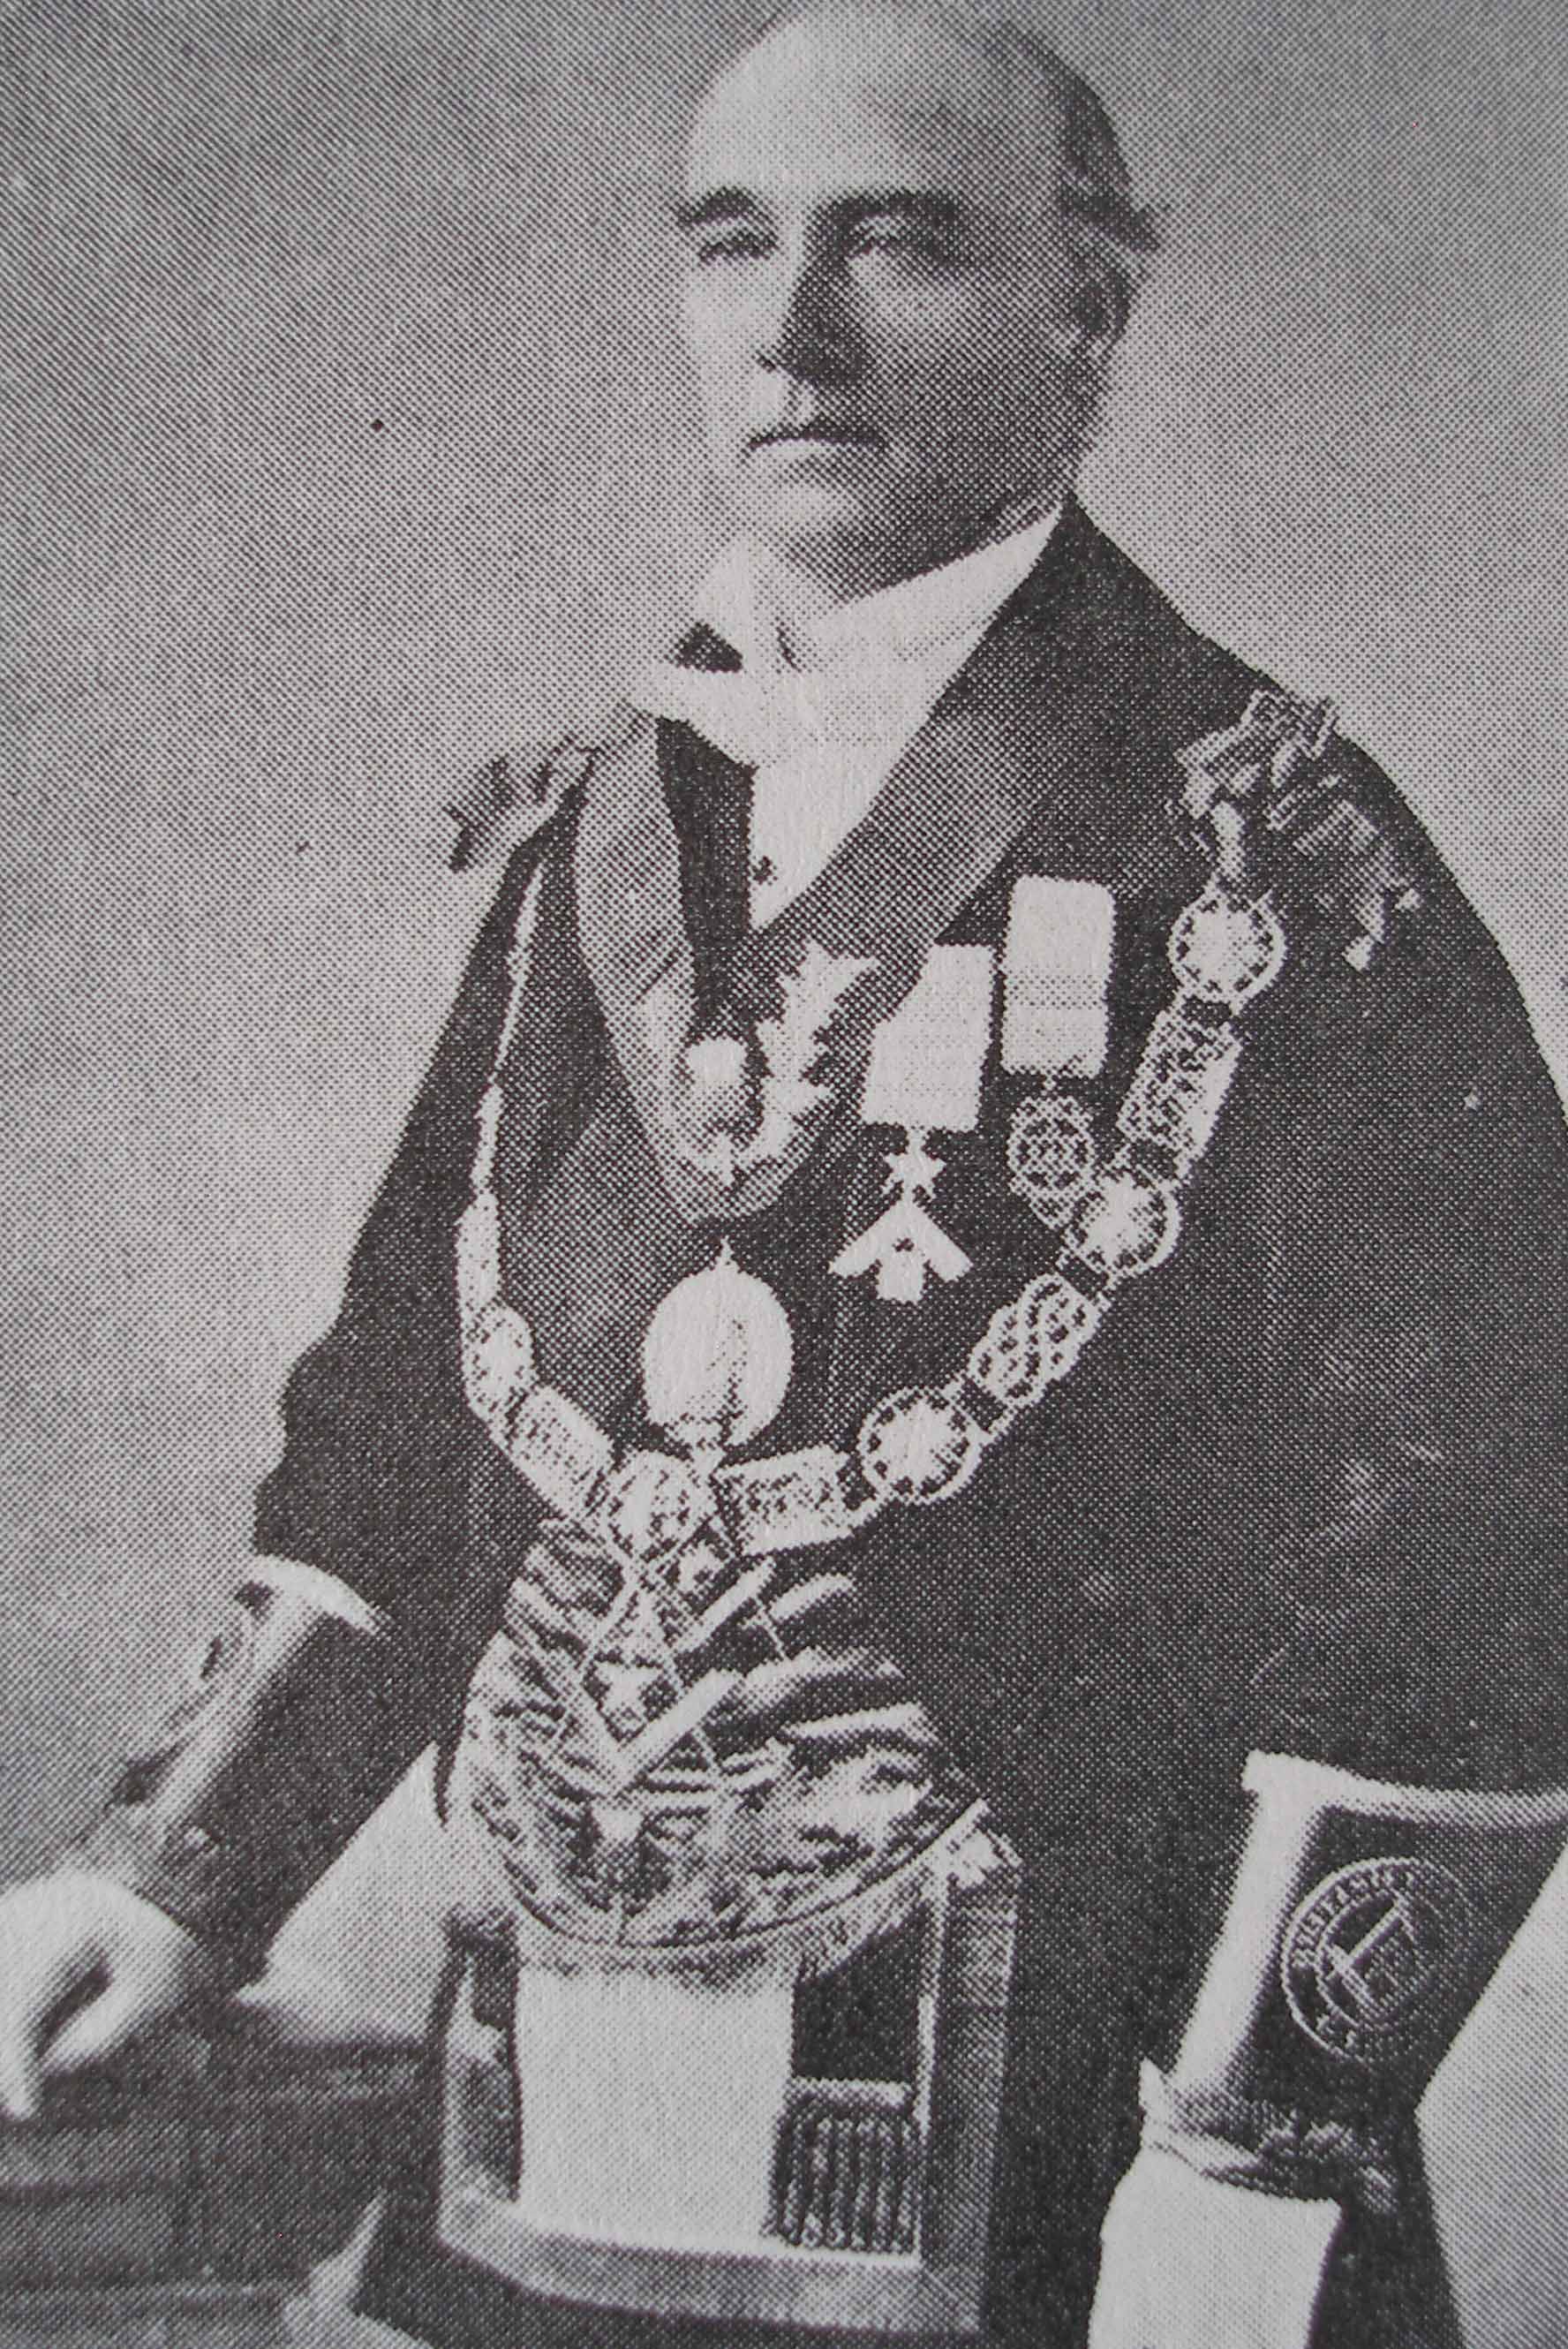 Most Worshipful Brother Eli Harrison as Grand Master, 1878